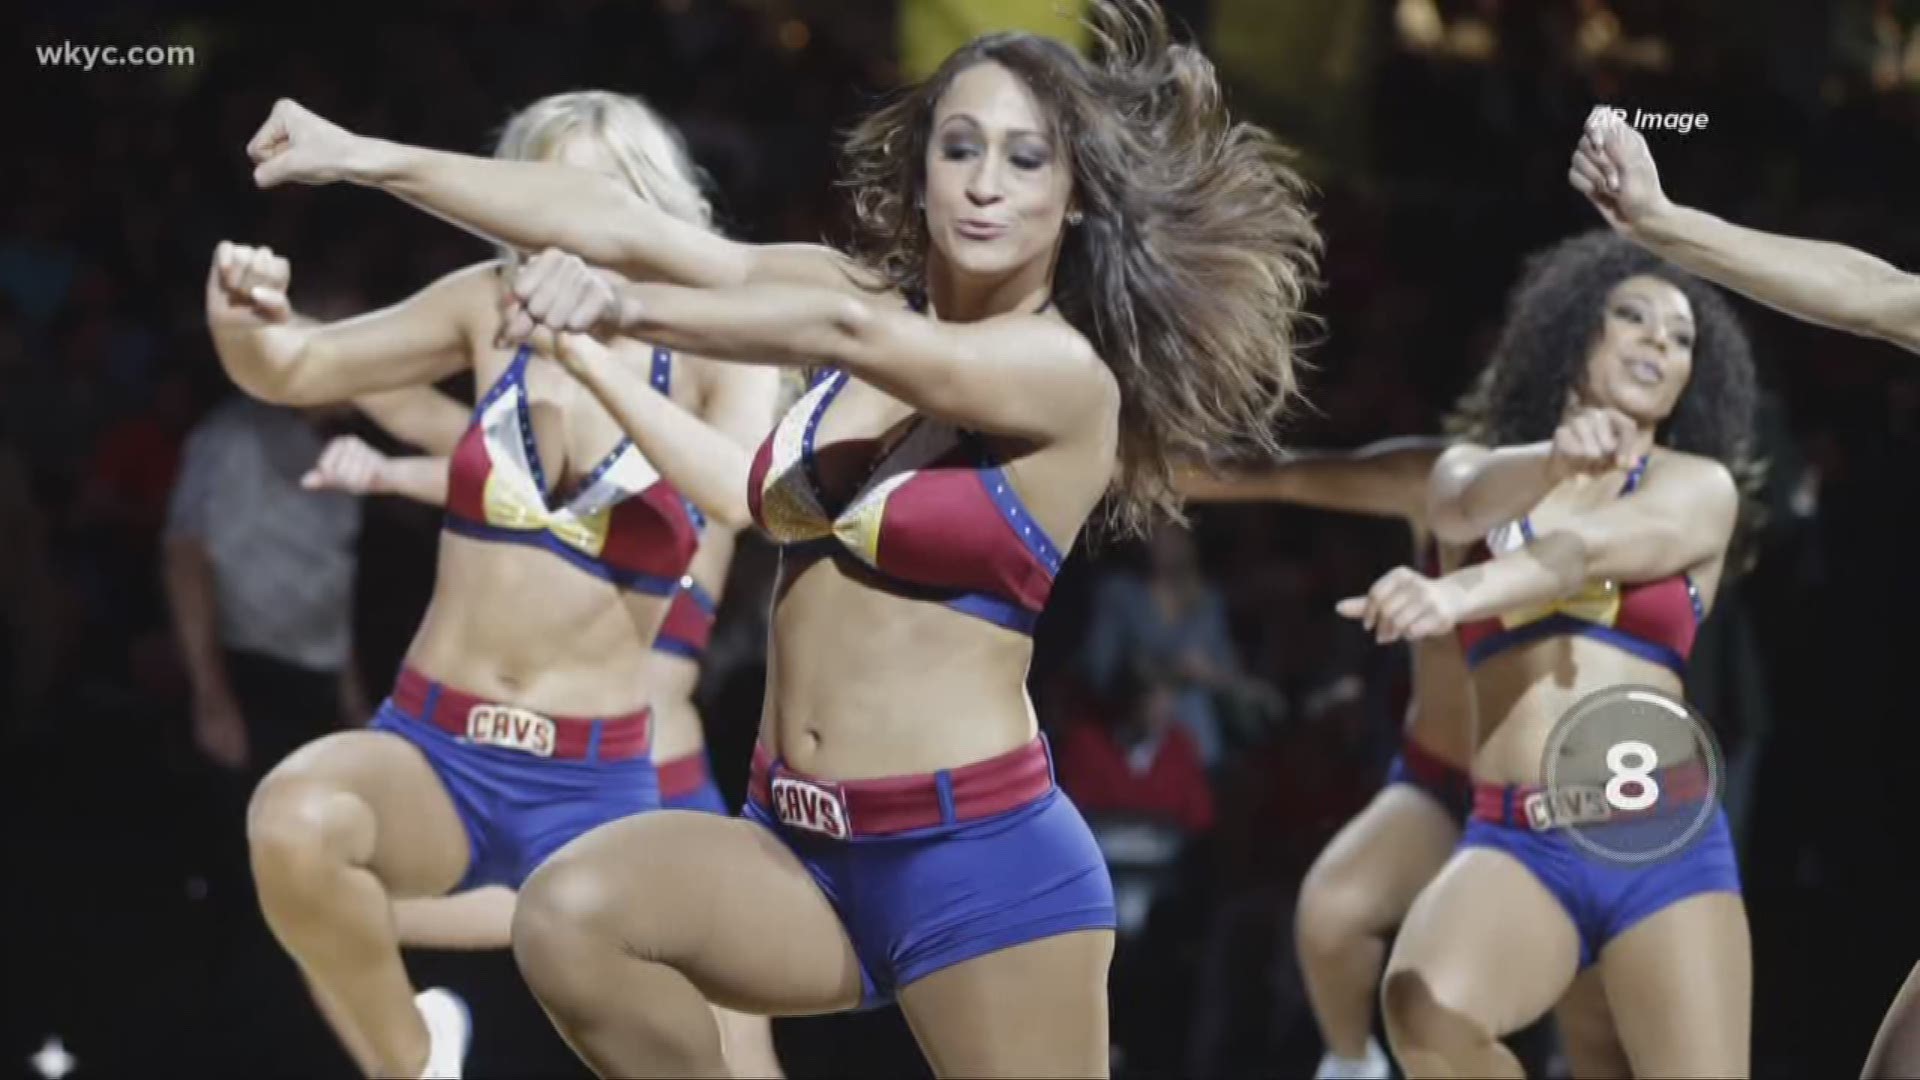 In place of the Cavalier Girls, the Cavs have announced the creation of the Cavs PowerHouse Dance Team, a co-ed group described as "a competitive level precision team specializing in high-energy tricks, tumbling and extremely dynamic choreography."